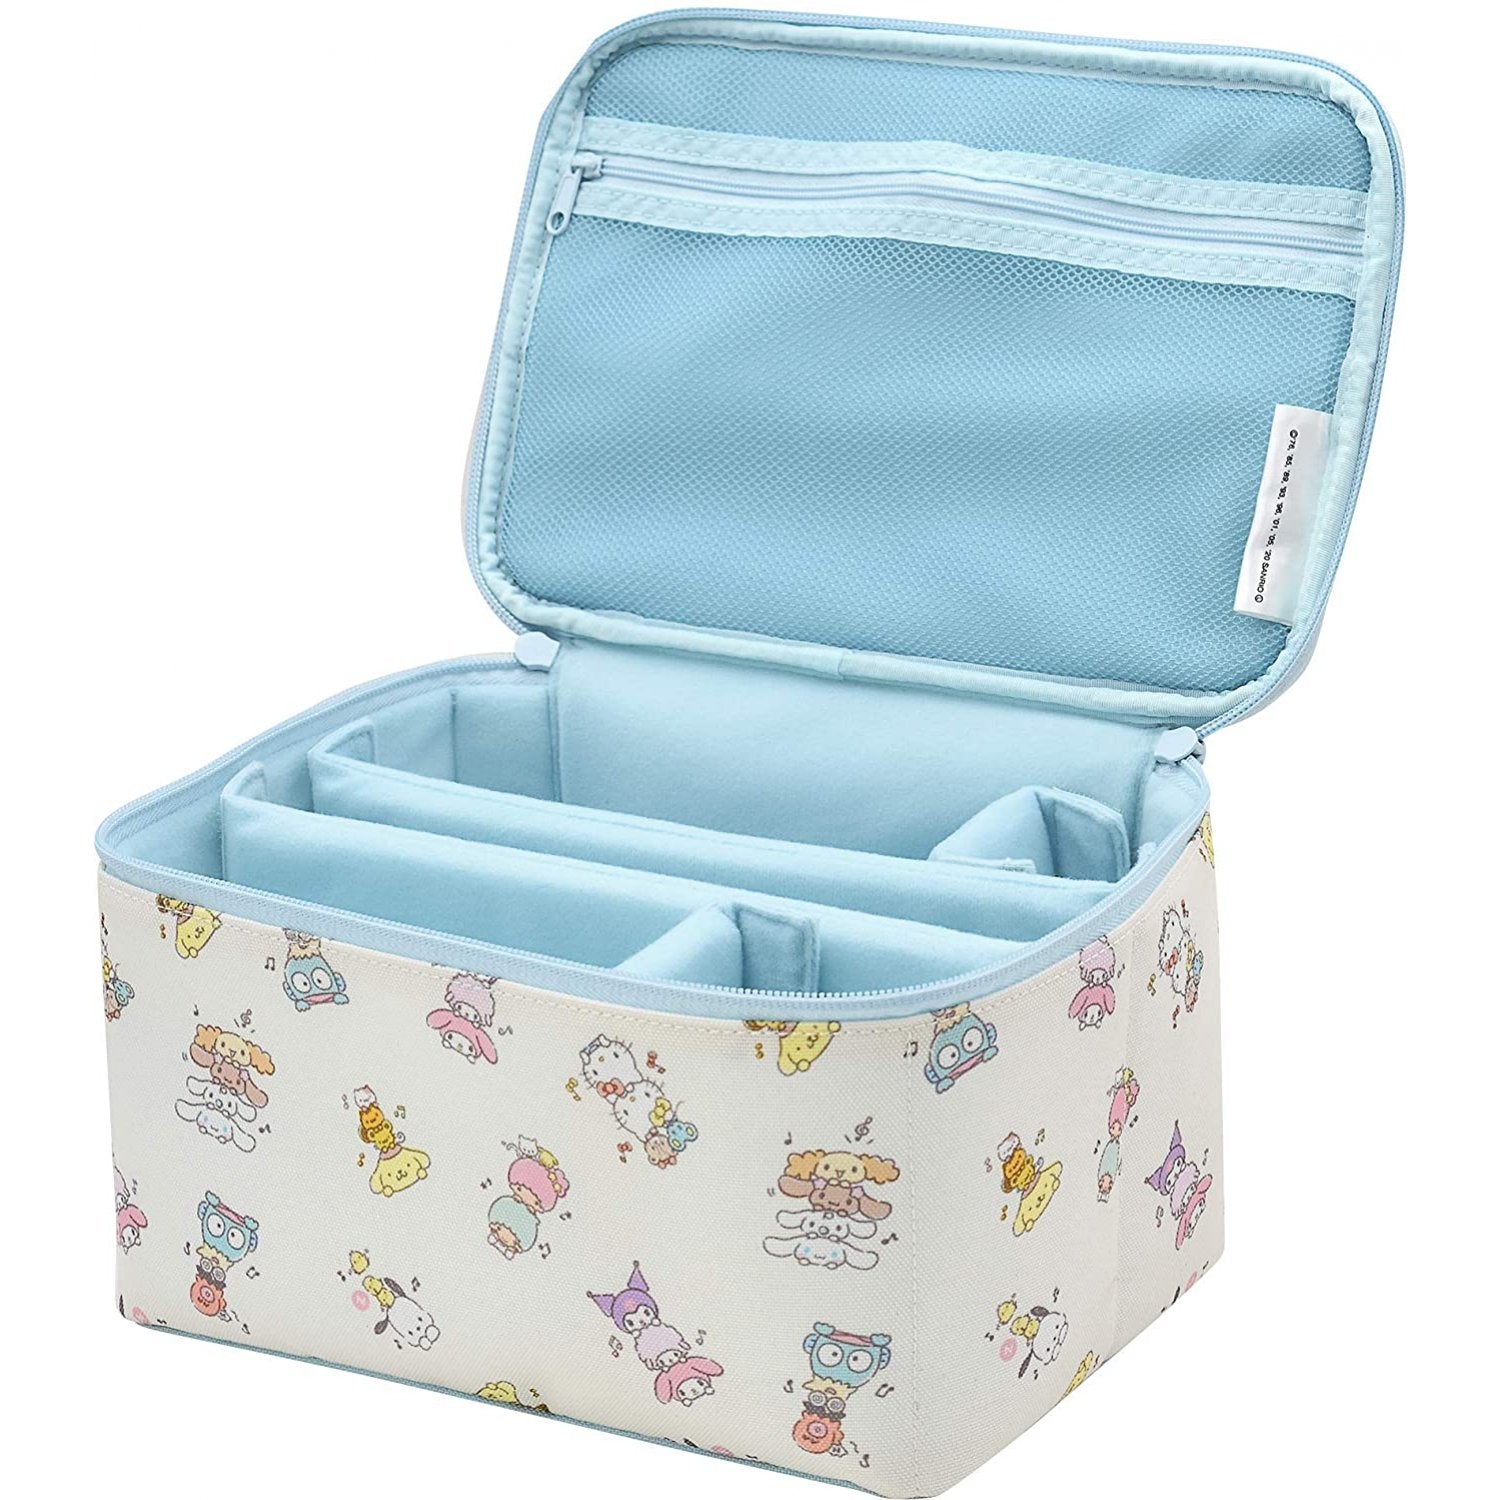 HORI NSW Sanrio Characters Whole Storage Bag (AD24-002A)